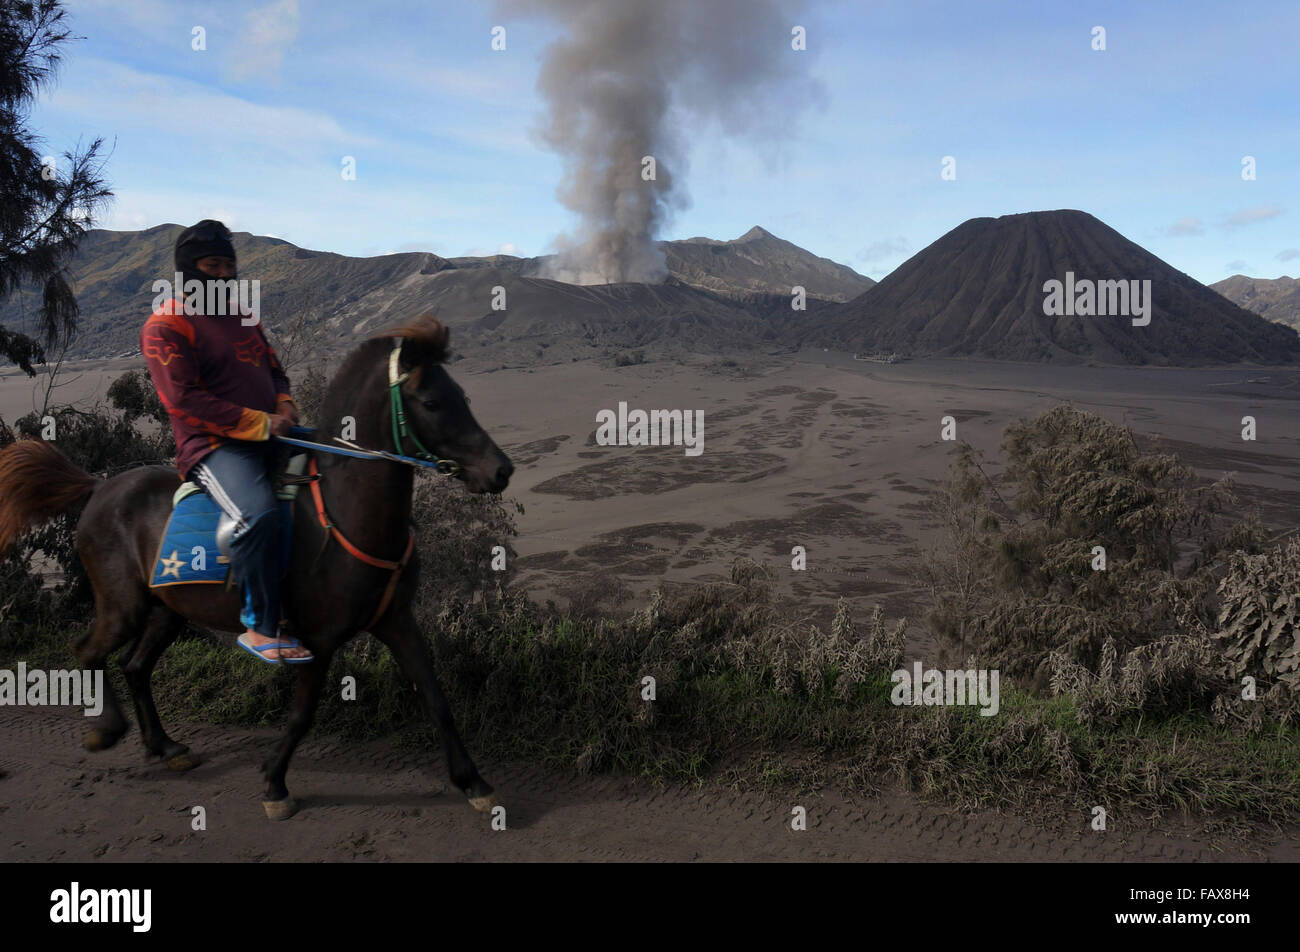 Pasuruan, Indonesia. 29th Dec, 2015. Residents Tenggerese rides a horse in the village of Cemoro where Mt. Bromo is seen erupting. The impact of the eruption affected the 24 districts in the two counties and one city with the volcanic ash that damaged agricultural land and crops. © Adhitya Hendra/Pacific Press/Alamy Live News Stock Photo